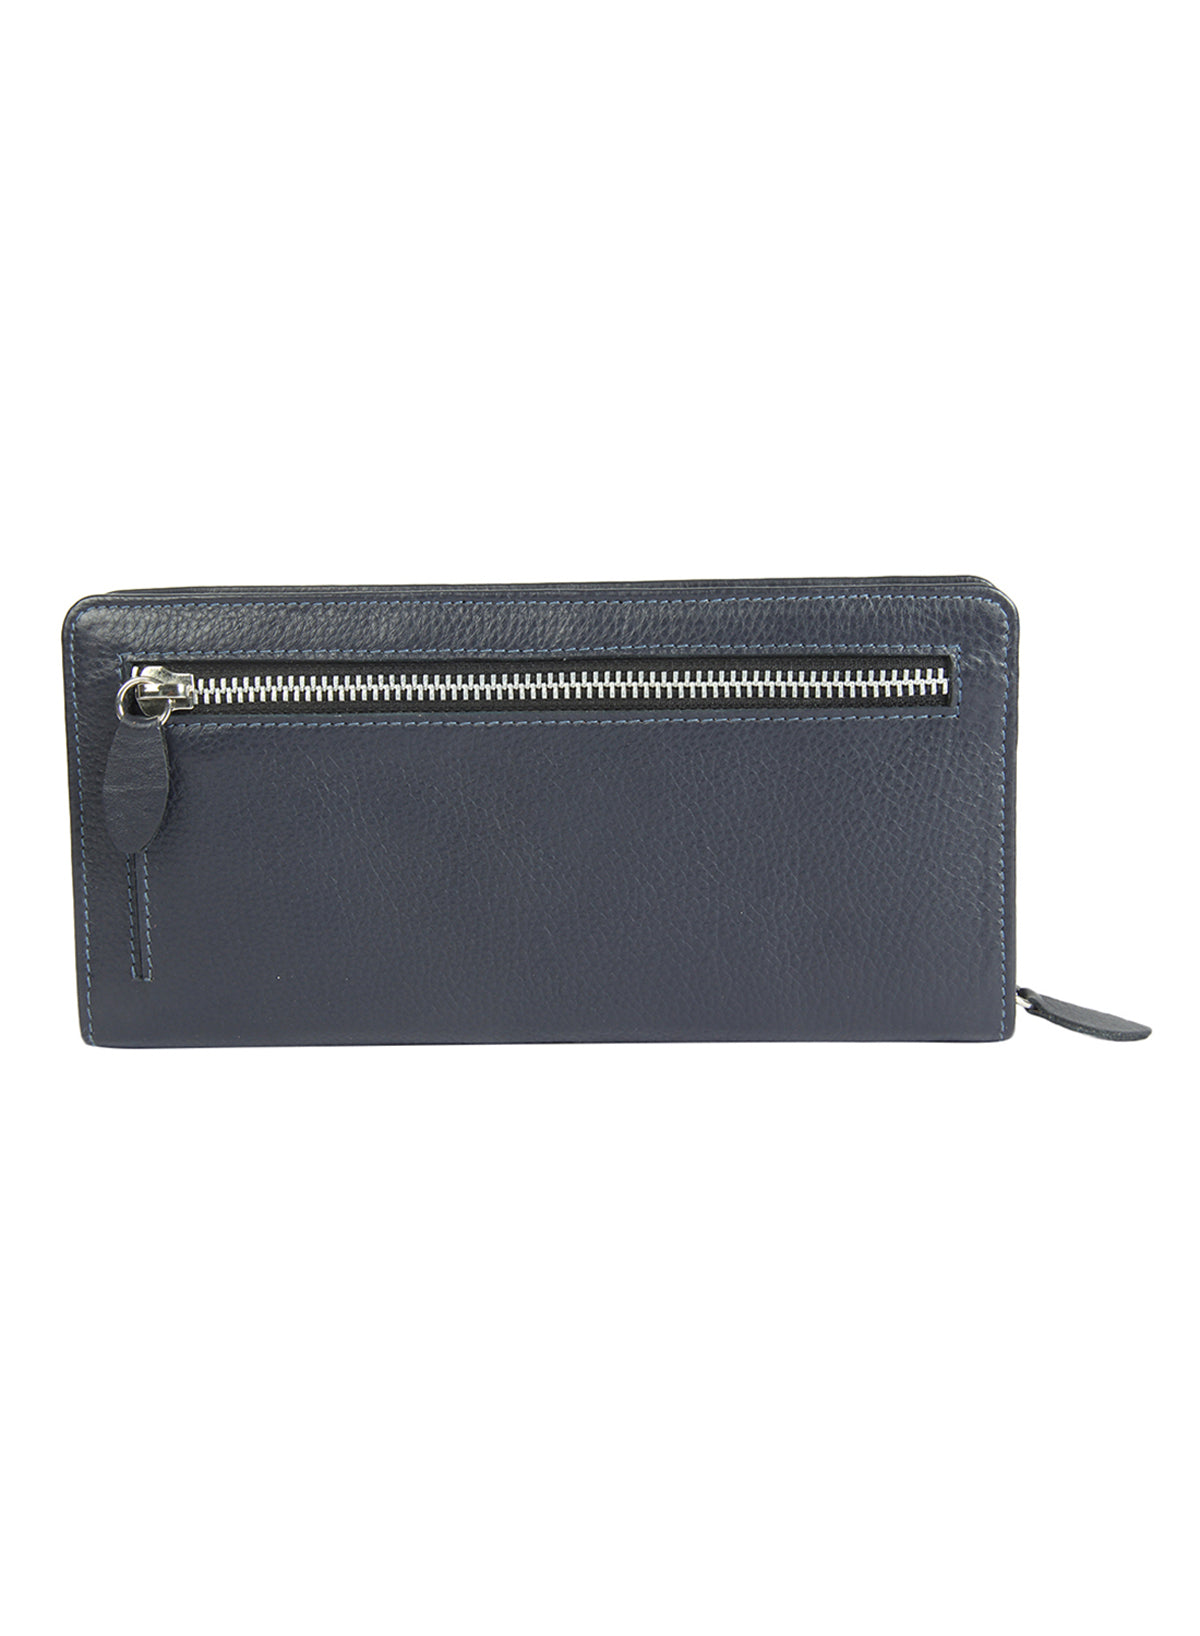 Genuine leather blue gusset clutch